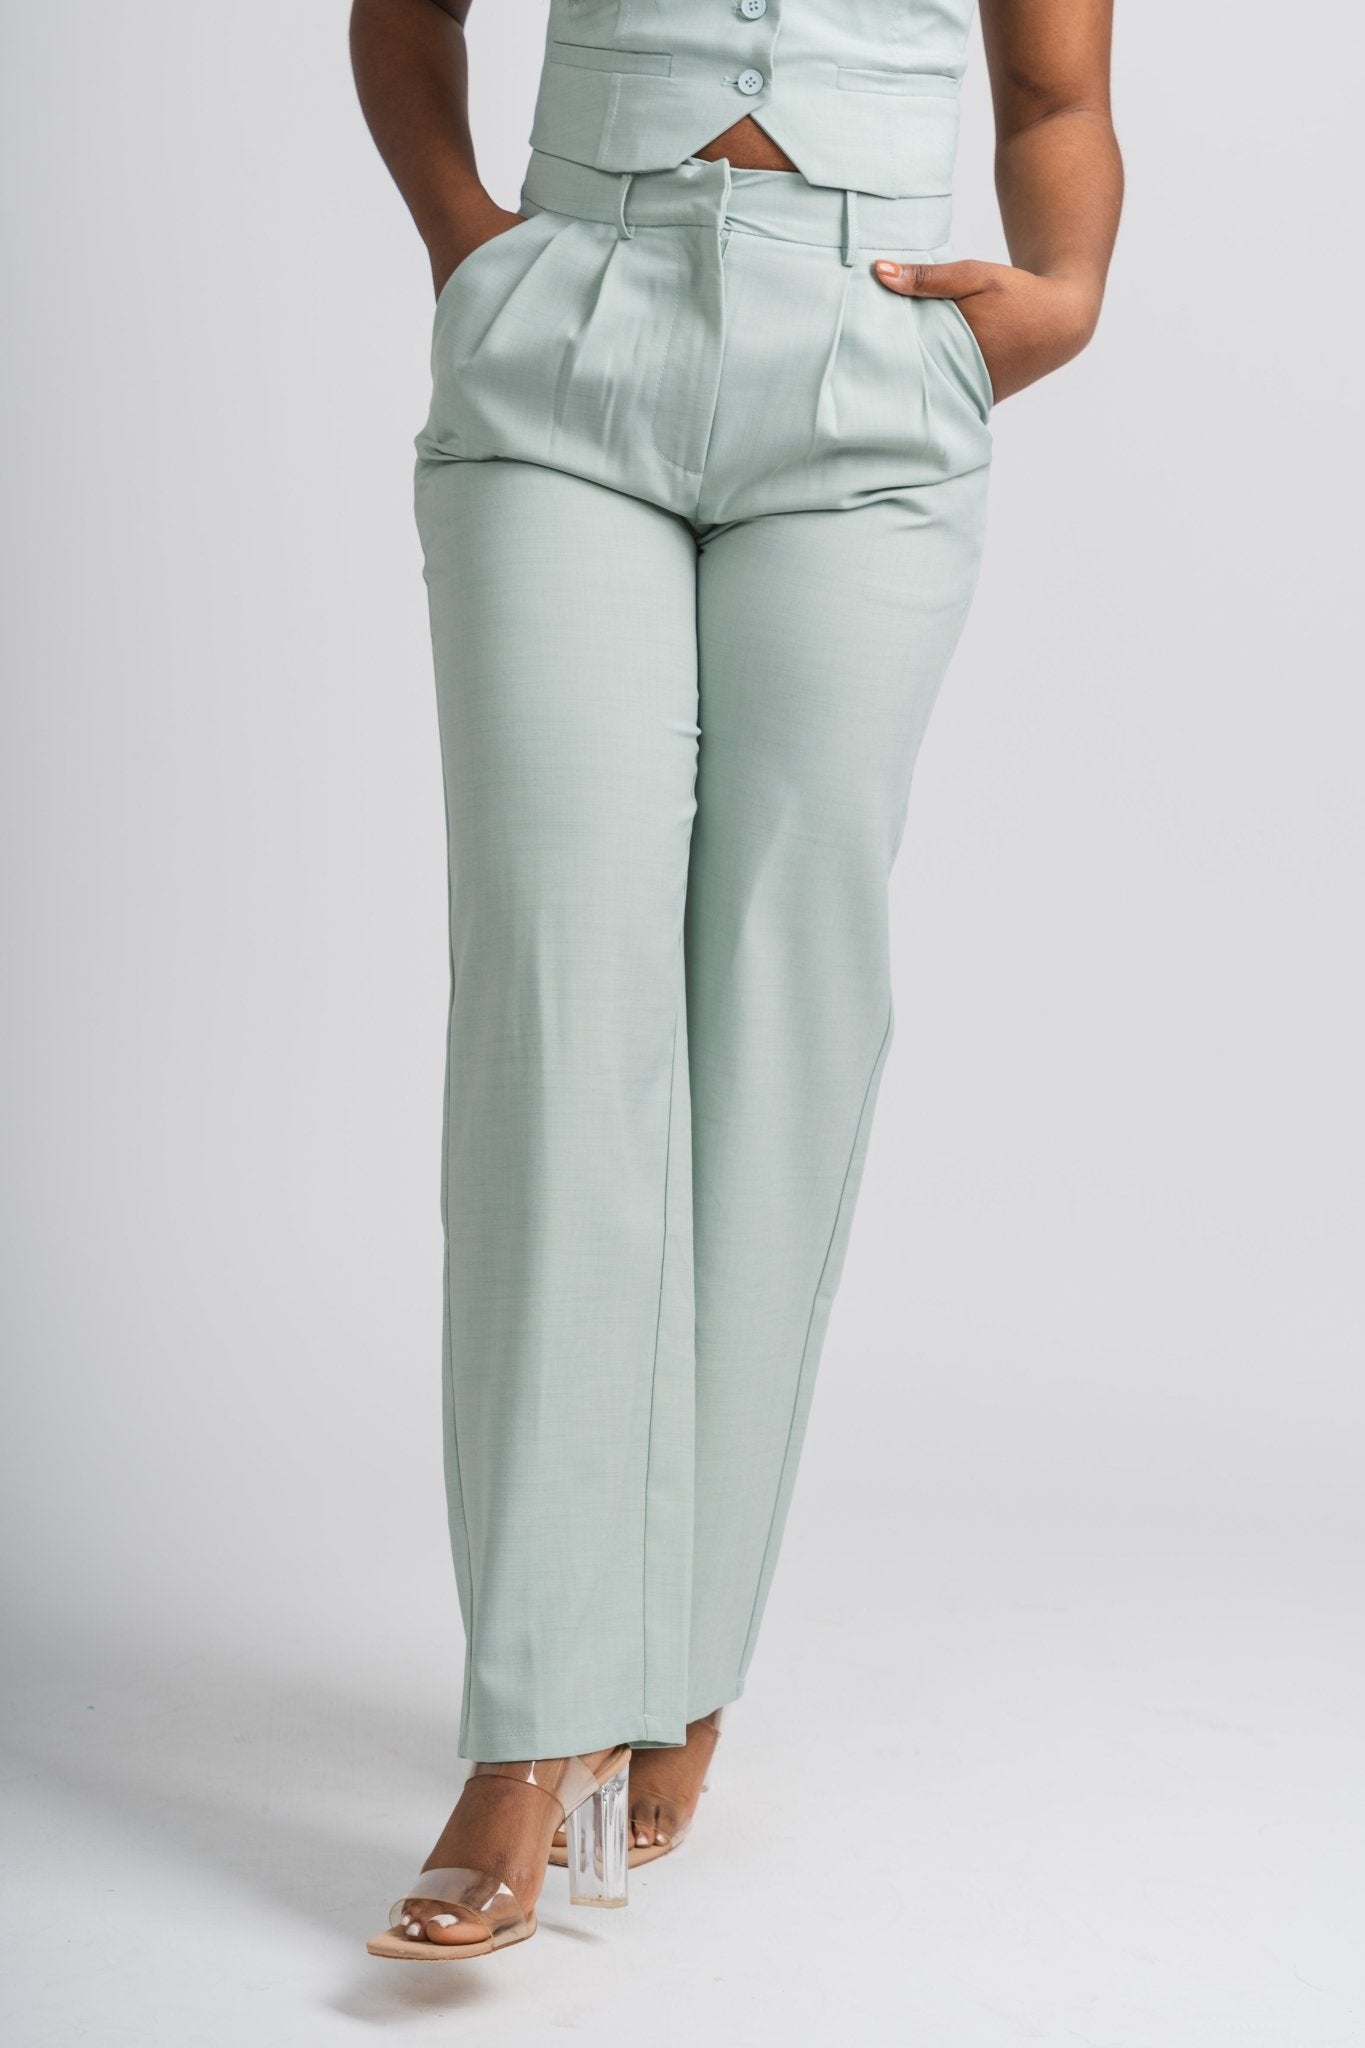 Wide leg pants sage - Affordable Pants - Unique Easter Style at Lush Fashion Lounge Boutique in Oklahoma